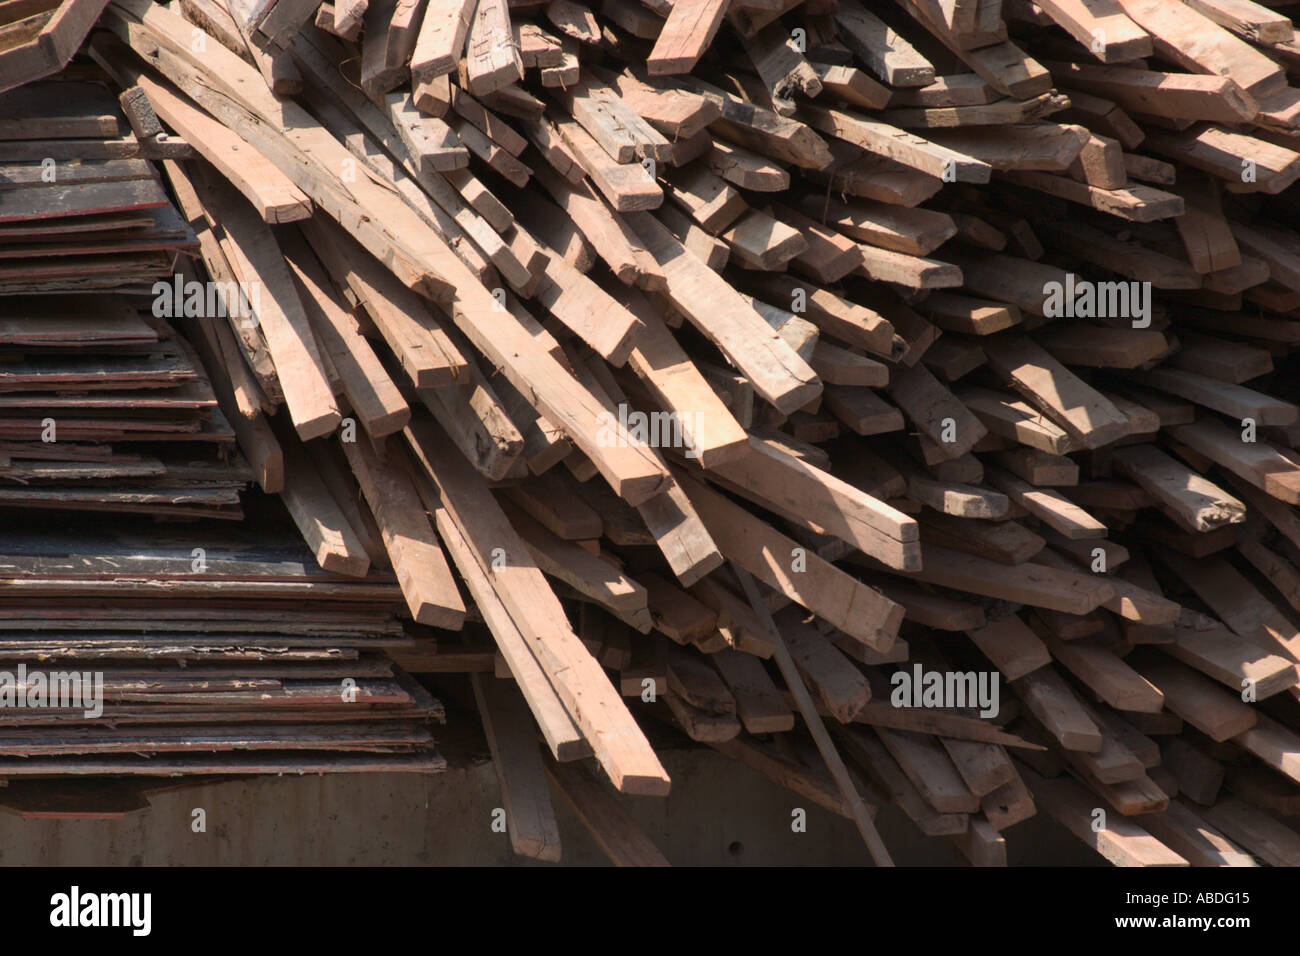 wooden planks used for building construction Stock Photo